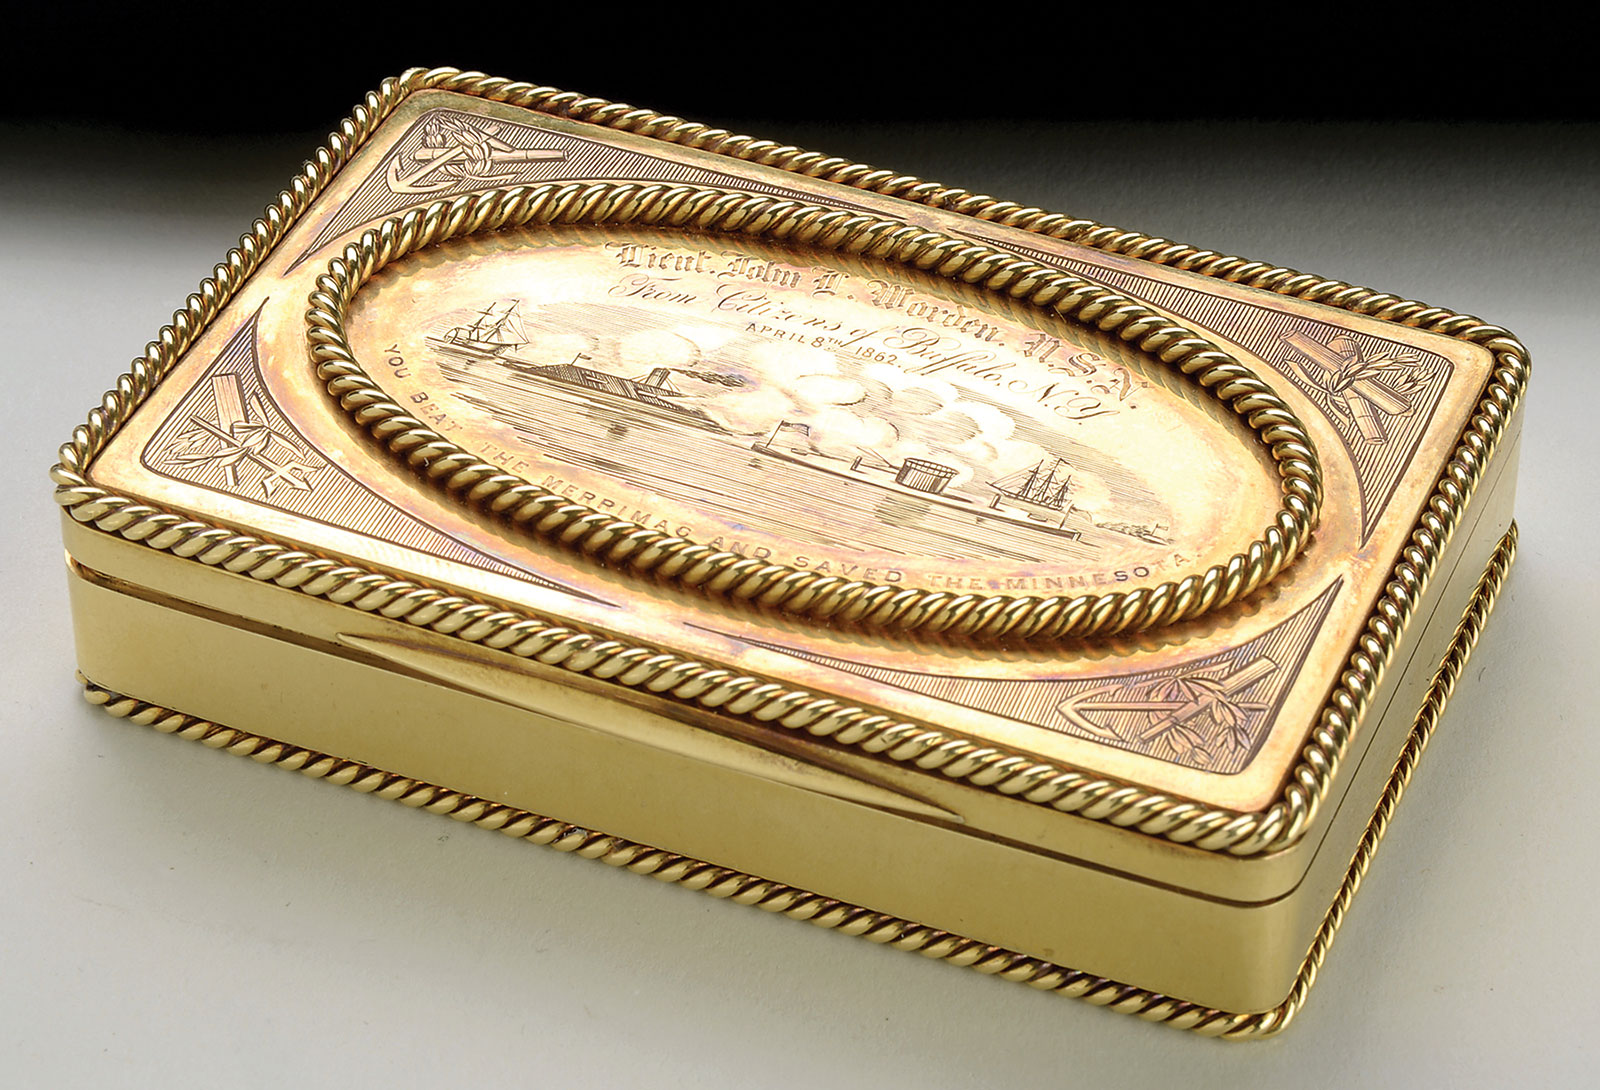 Gold Tiffany Presentation Snuff Box Presented by the Citizens of Buffalo to Lt. John Worden, Hero of the Victory of the Monitor Over the Merrimac, estimated at $30,000-50,000.